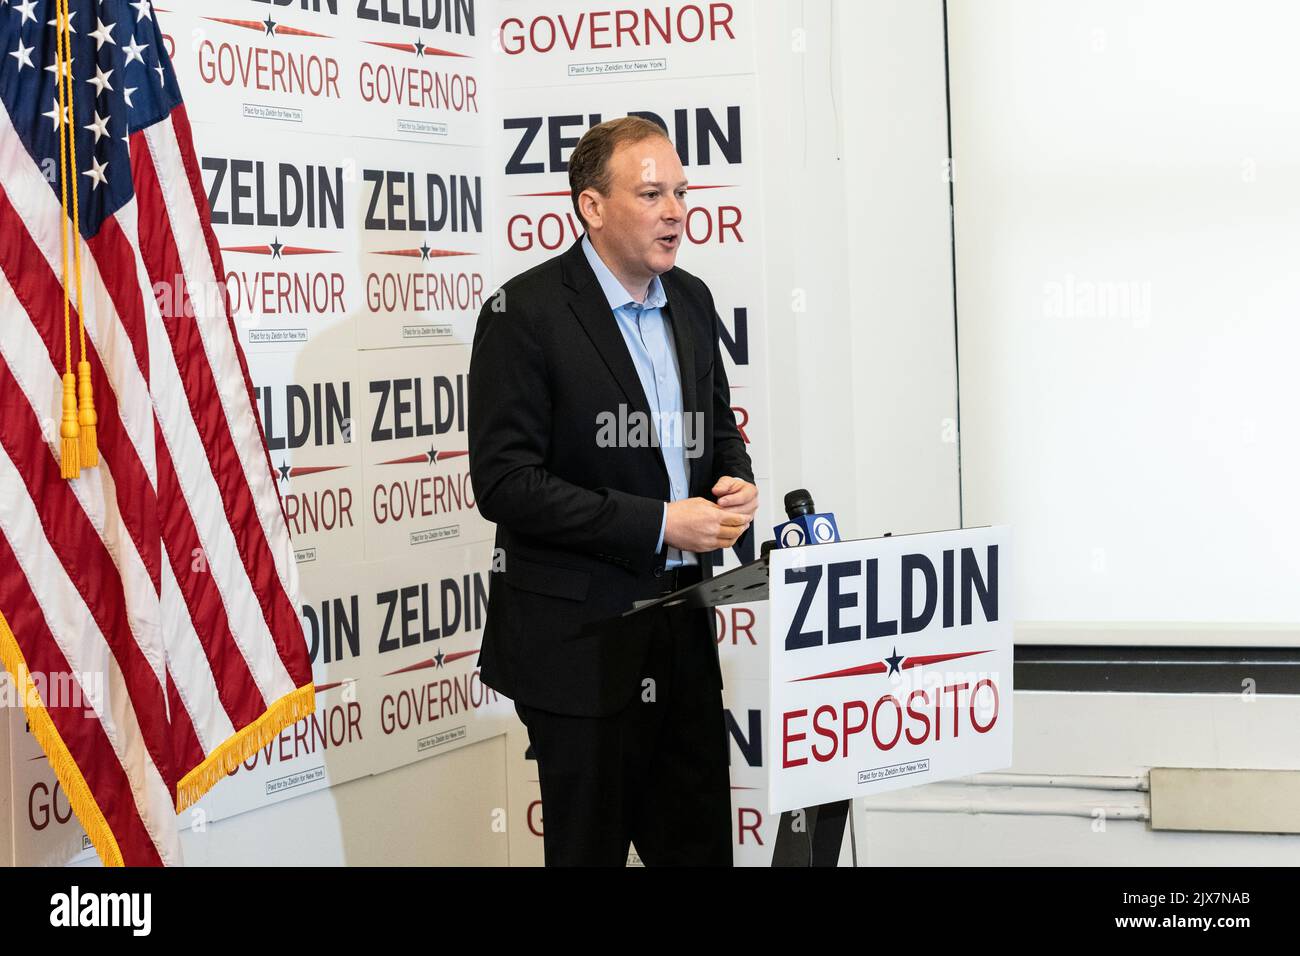 New York, NY - September 6, 2022: Republican and Conservative Parties nominee for Governor Lee Zeldin press conference on issue of debate at Zeldin NYC campaign headquarters Stock Photo